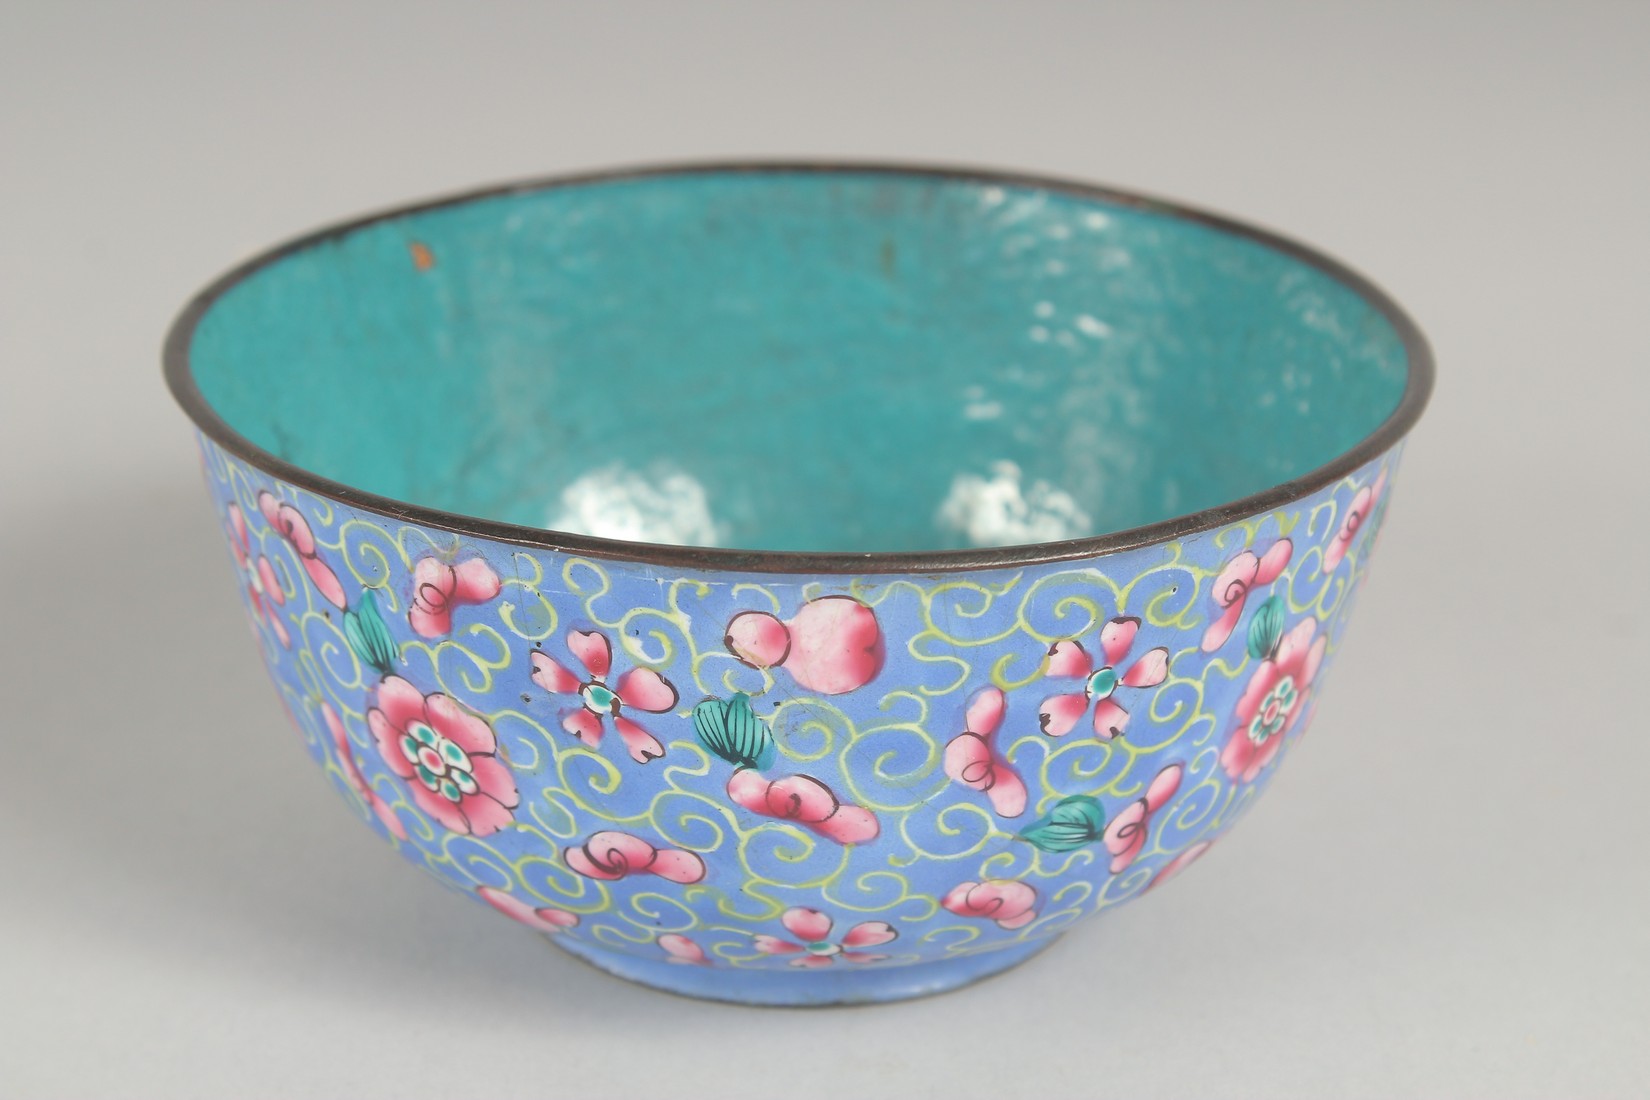 A CHINESE CANTON FAMILLE ROSE ENAMEL BOWL, the exterior with foliate decoration, 11.5cm diameter. - Image 2 of 5